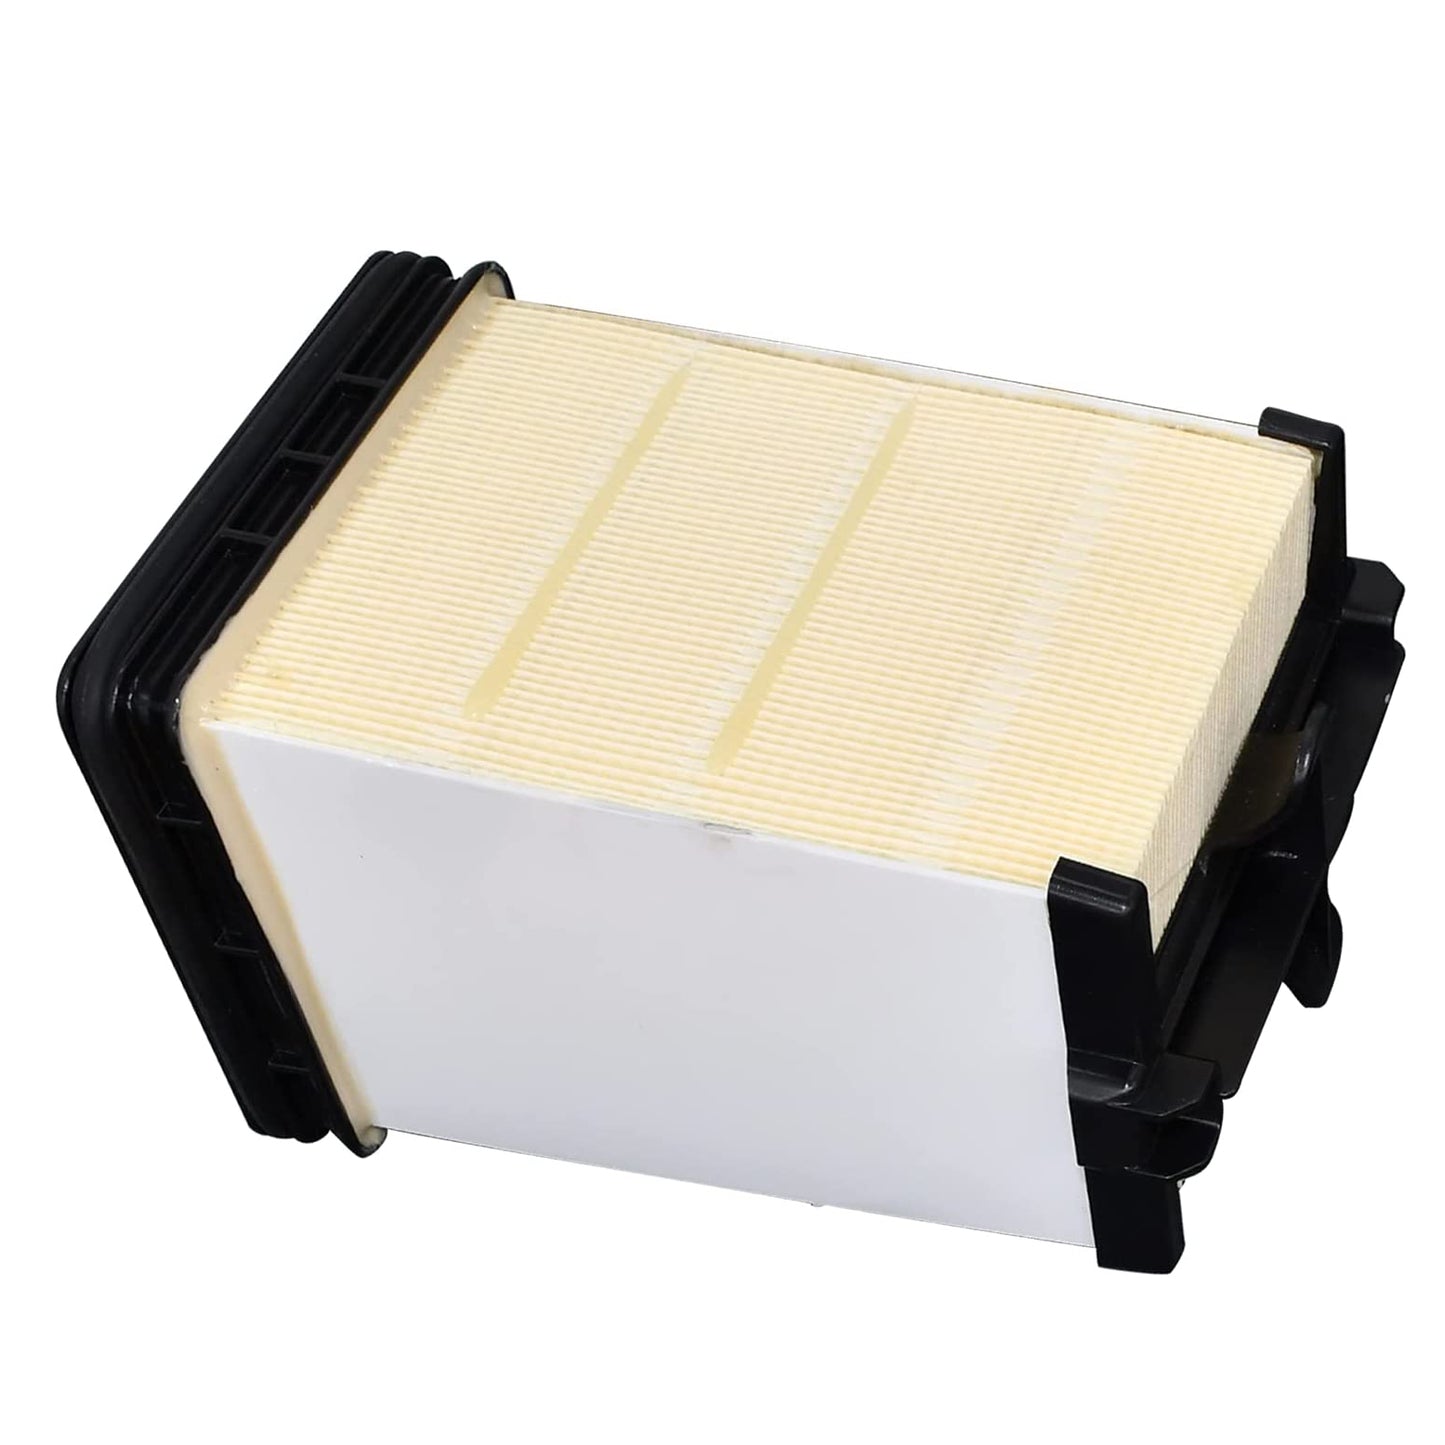 New 7221934 7286322 Air Filter Kit Compatible with Bobcat T450 T550 T590 T595 T630 T650 T870